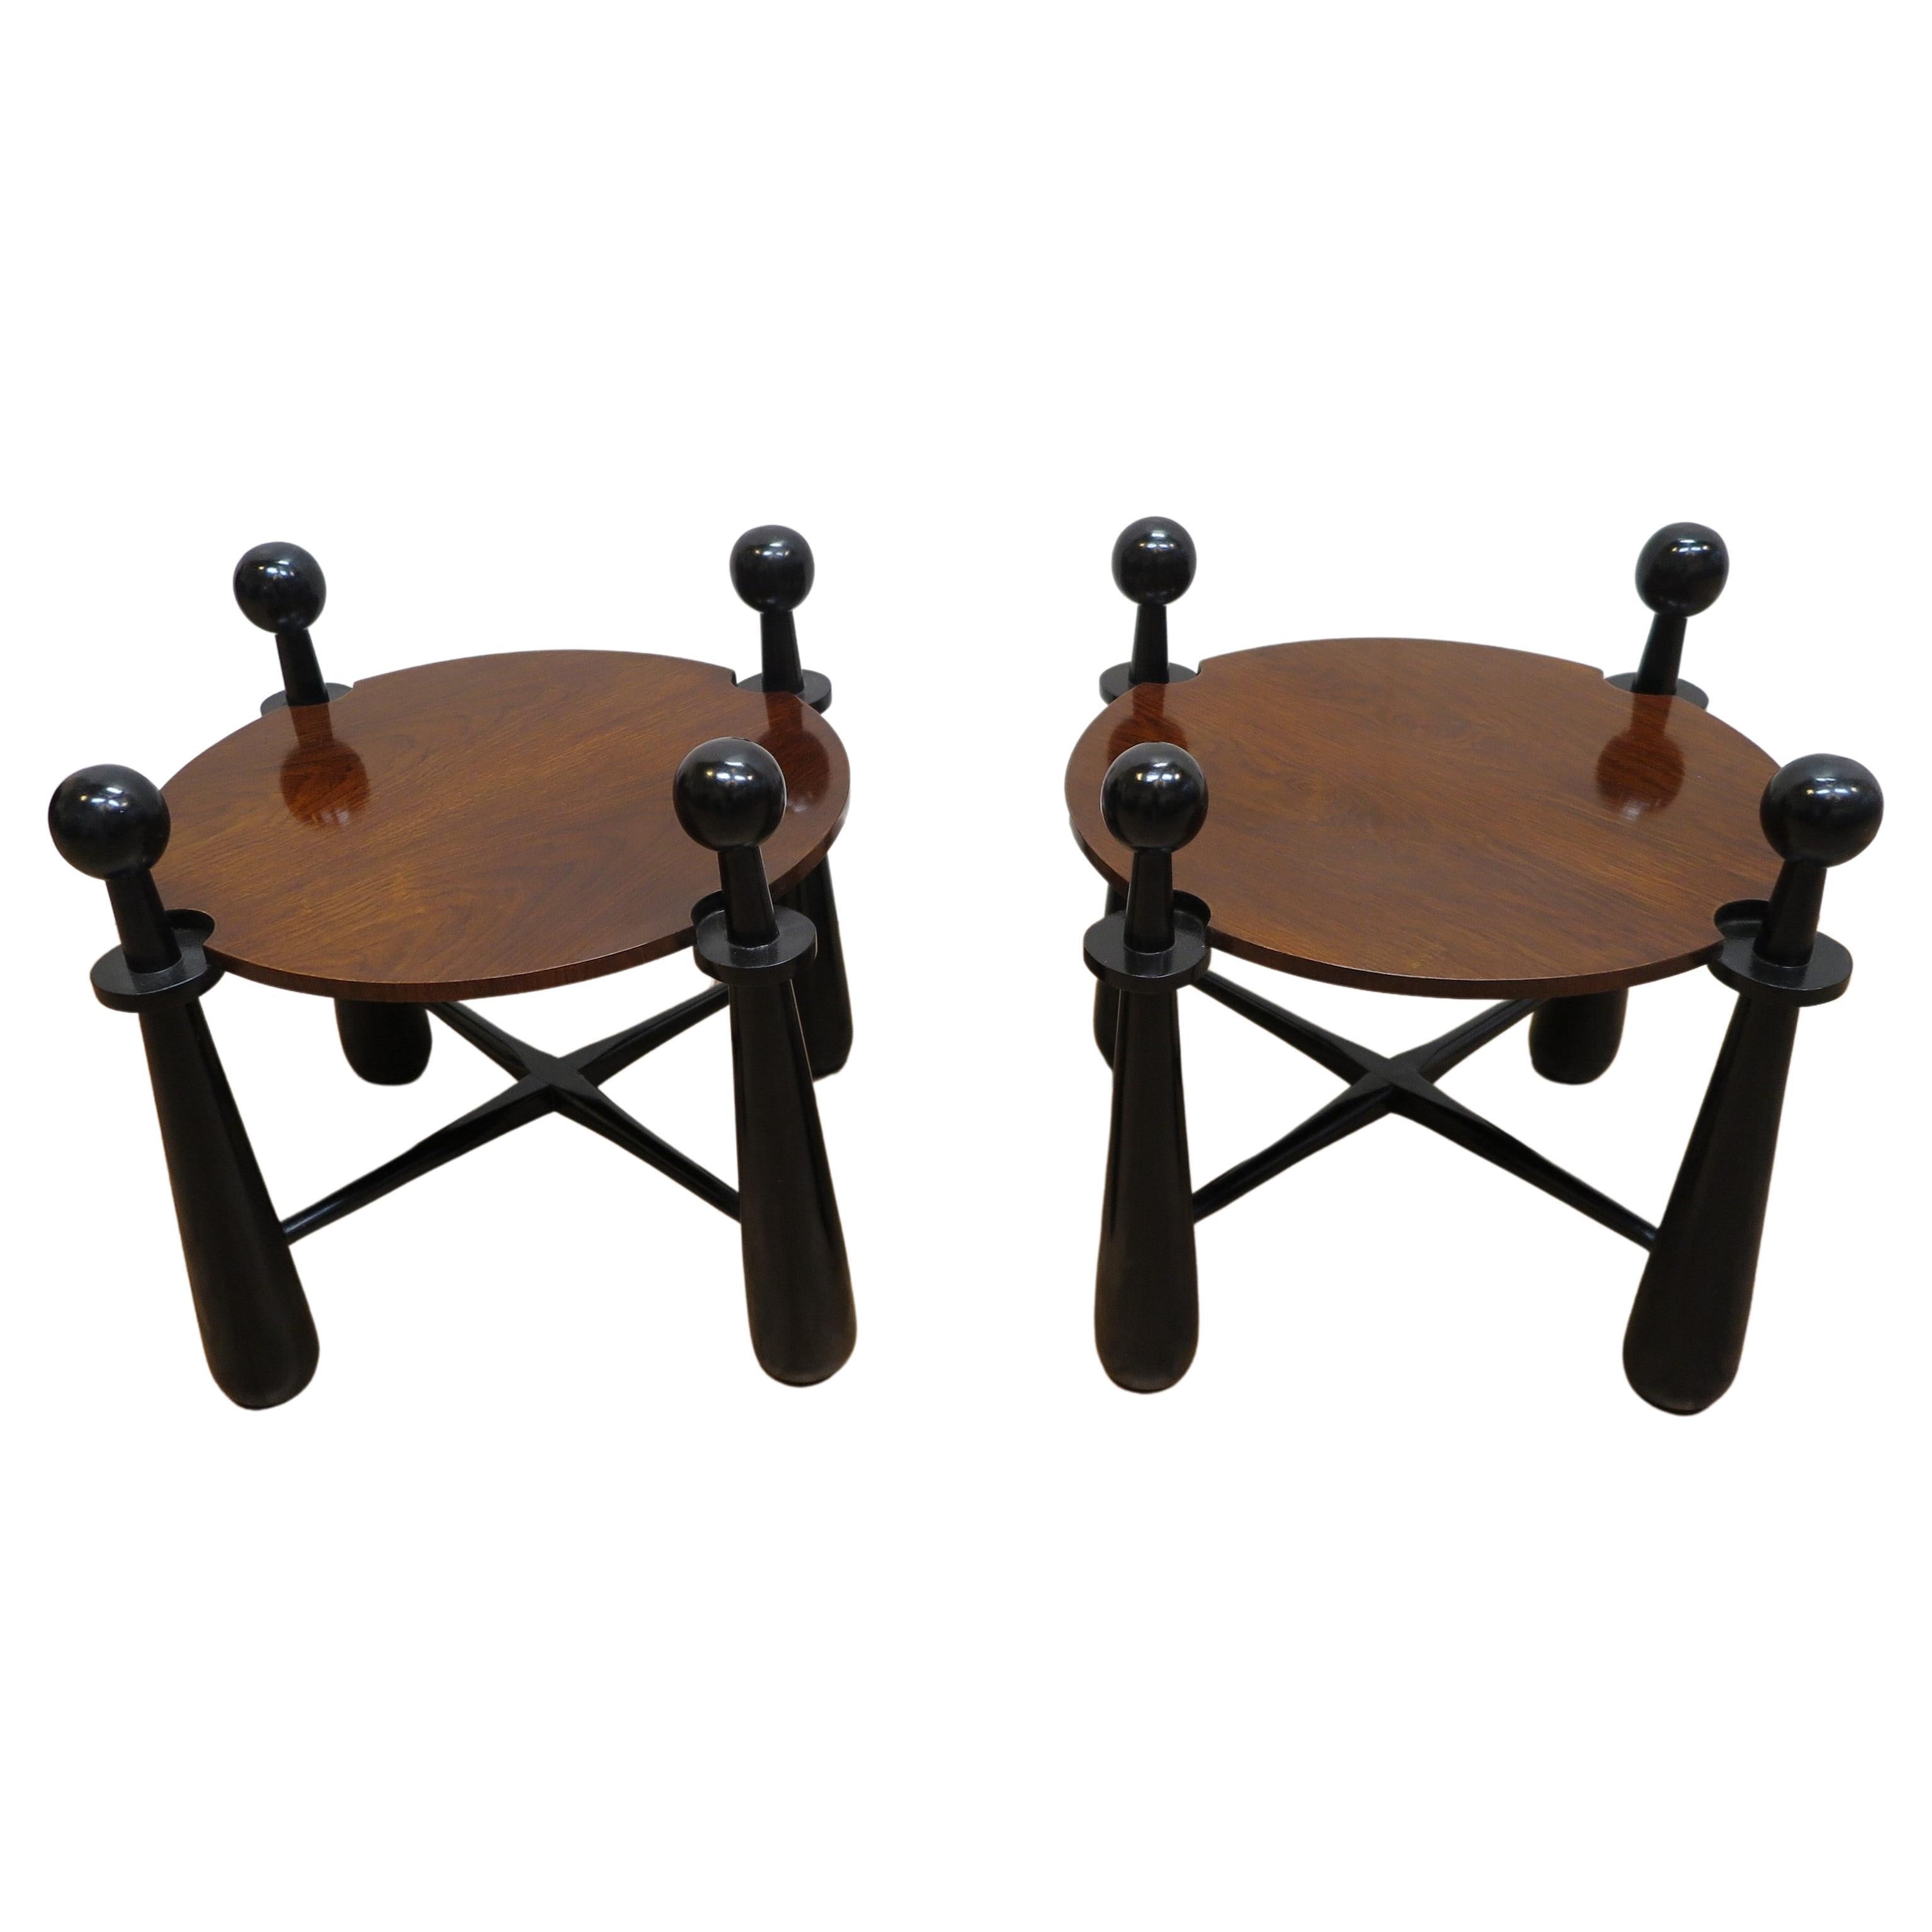 Pair of side tables in the style of Jean Royere. Outstanding Round Side Tables having inverted cone shaped legs toped with sphere finials. Demilune cutout details to the table platforms accentuate the raised sphere finial tops. Legs have X base